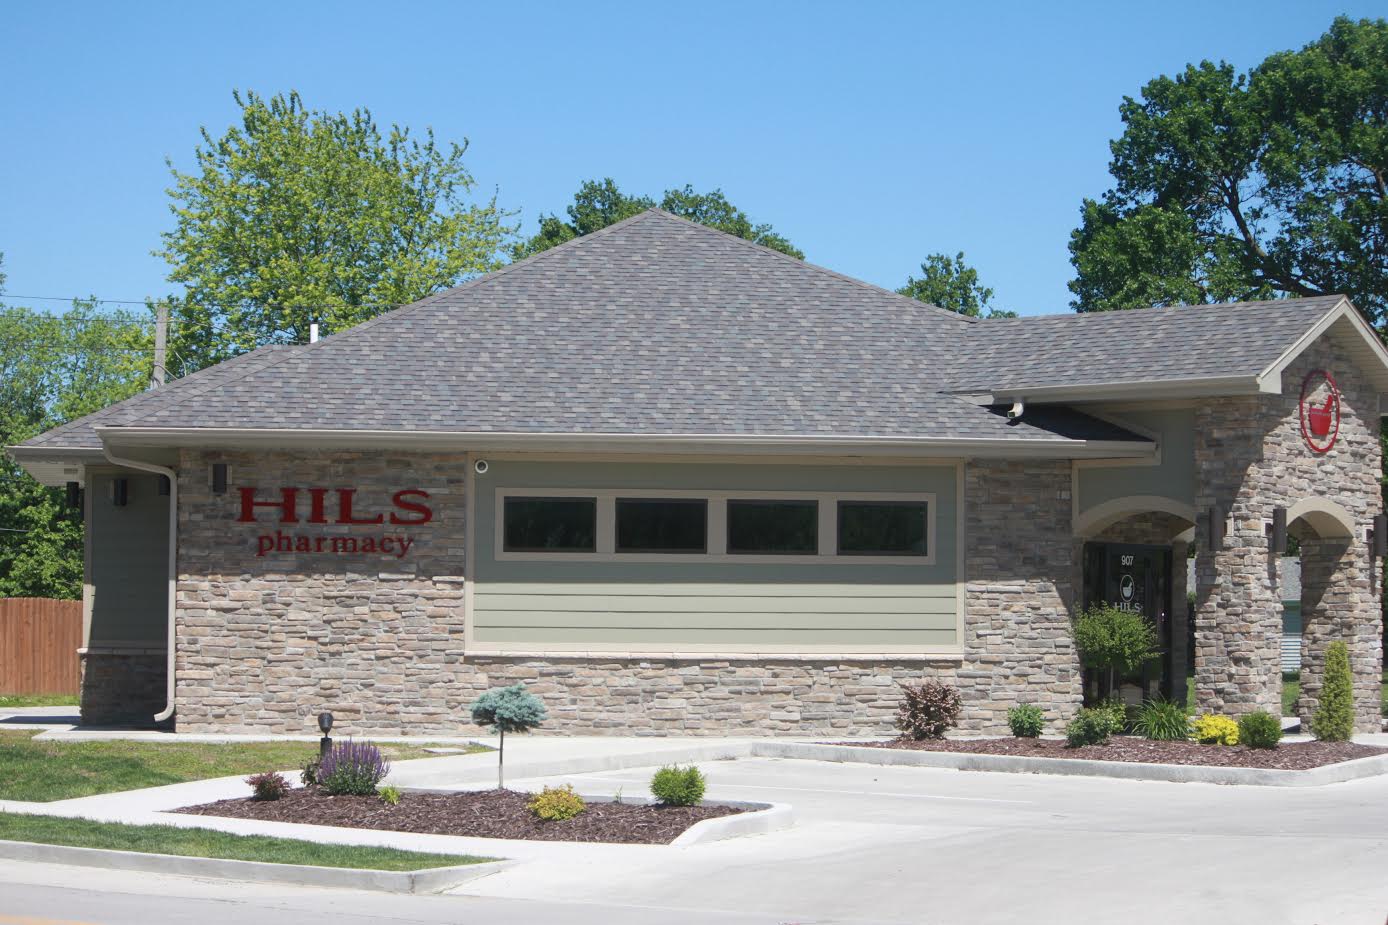 Hils Pharmacy has products & solutions for you in Moberly.